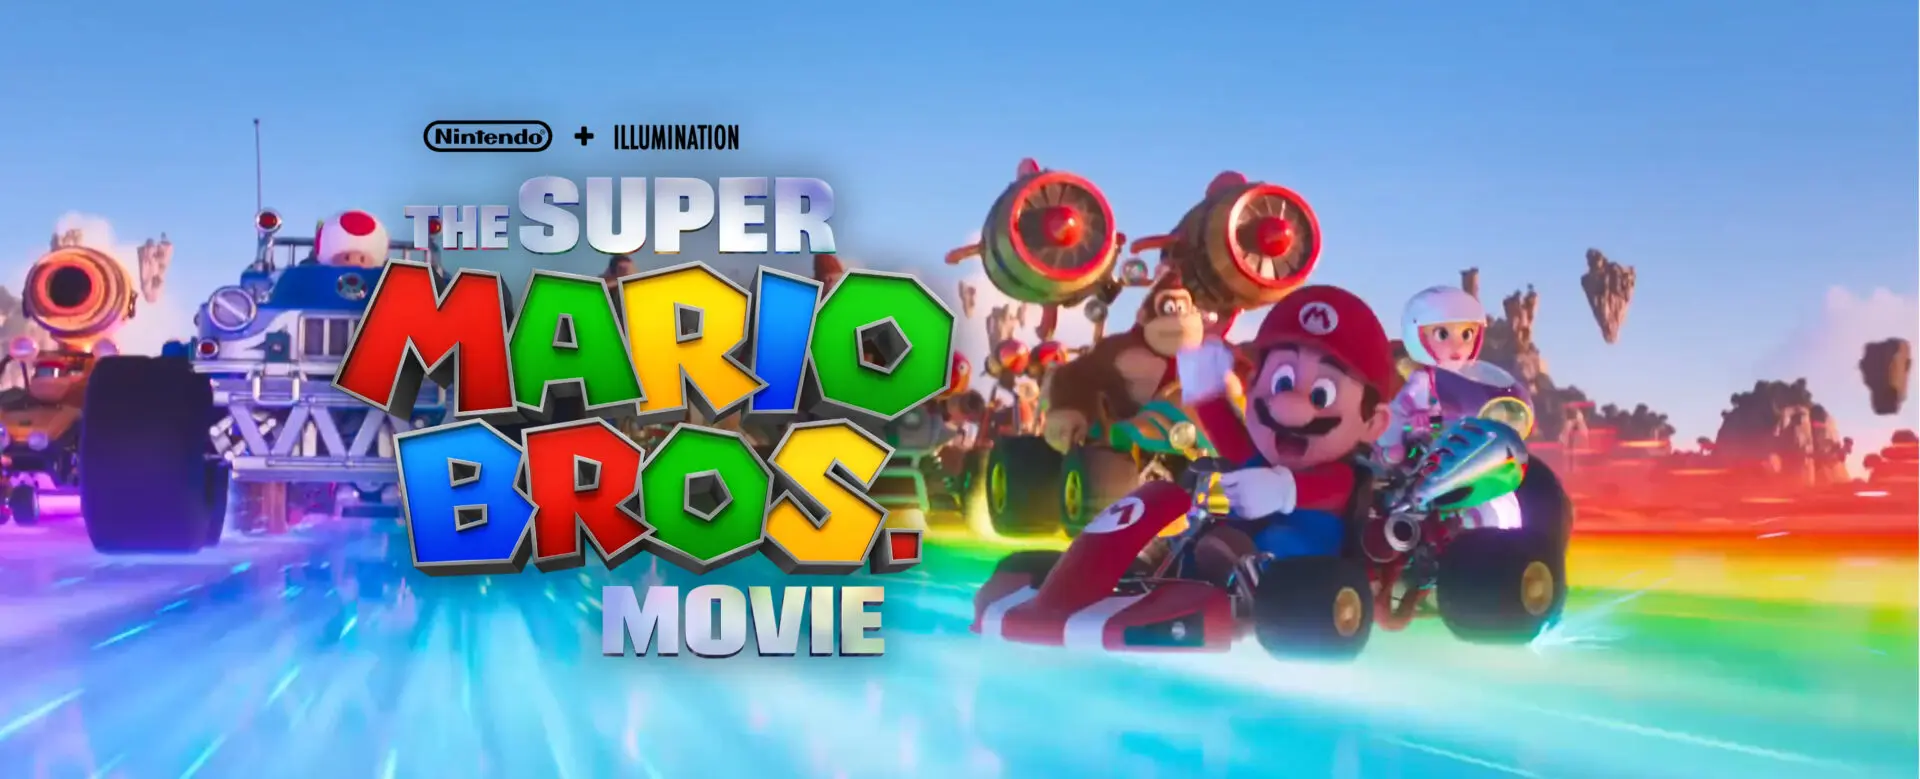 super mario brothers theatrical trailer1